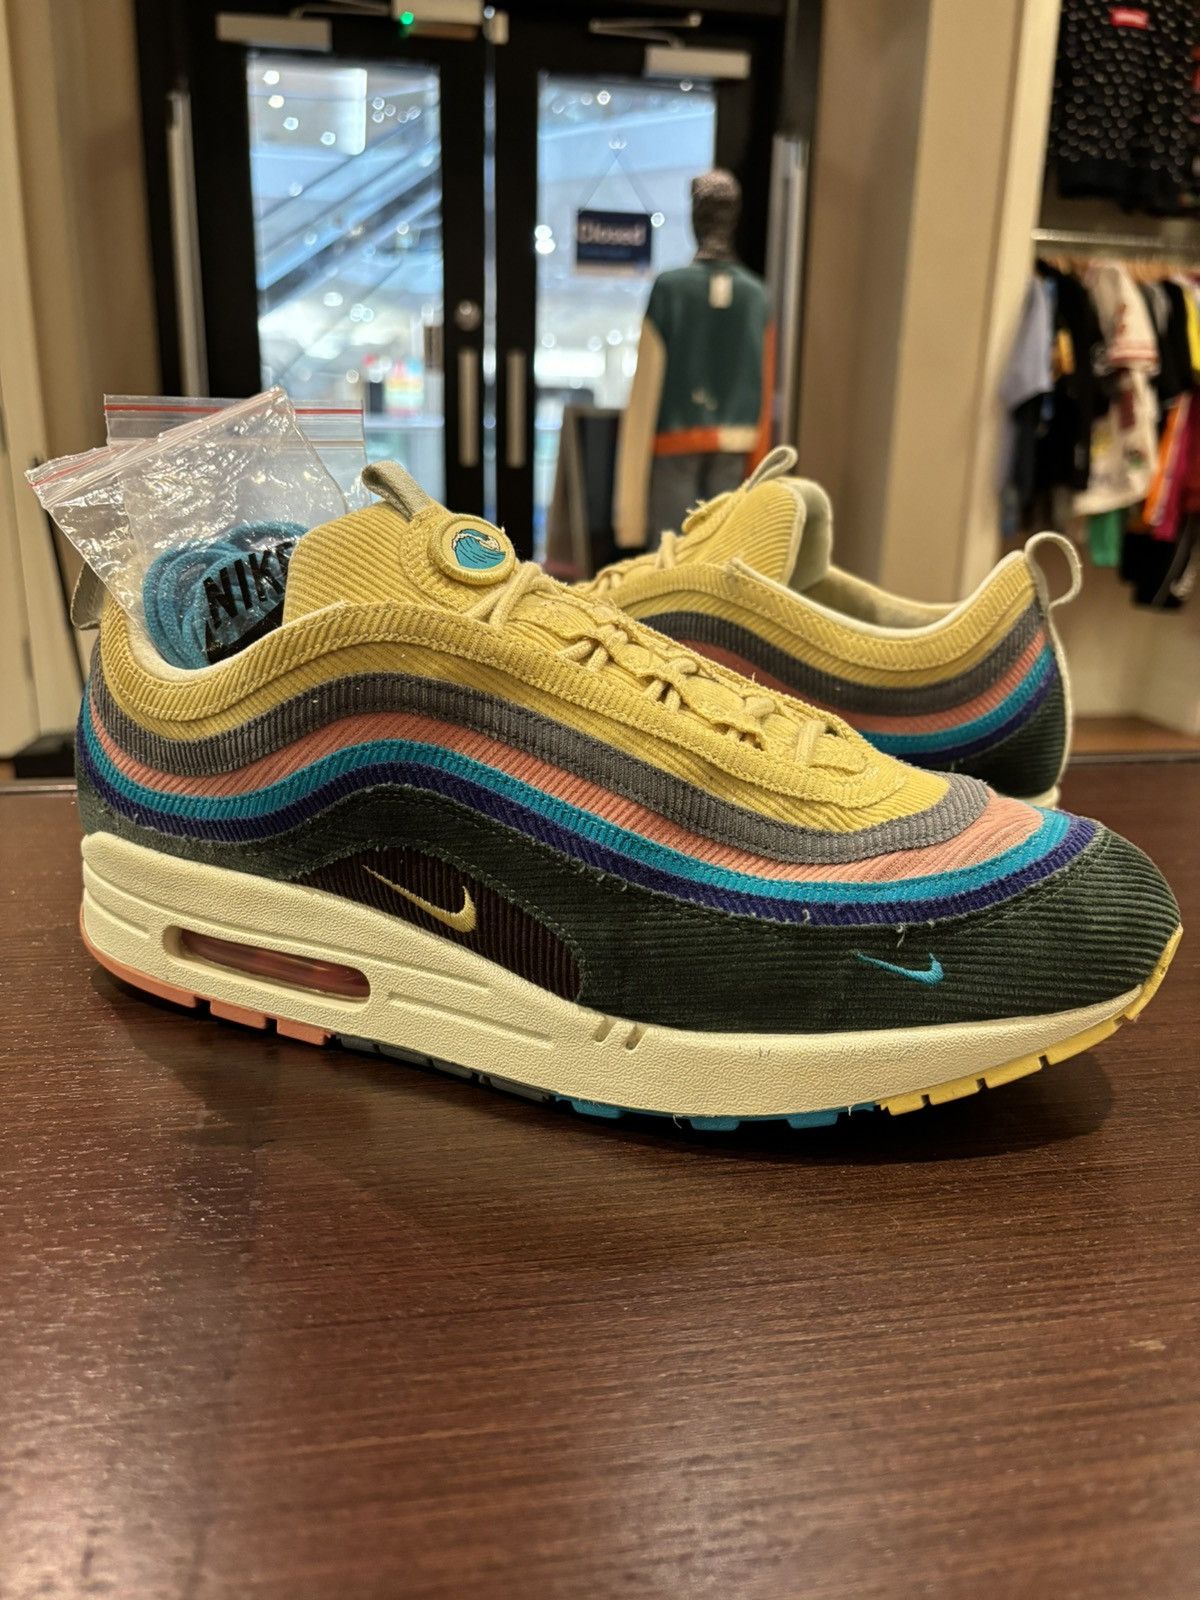 Nike Sean Witherspoon Air Max 97/1 | Grailed